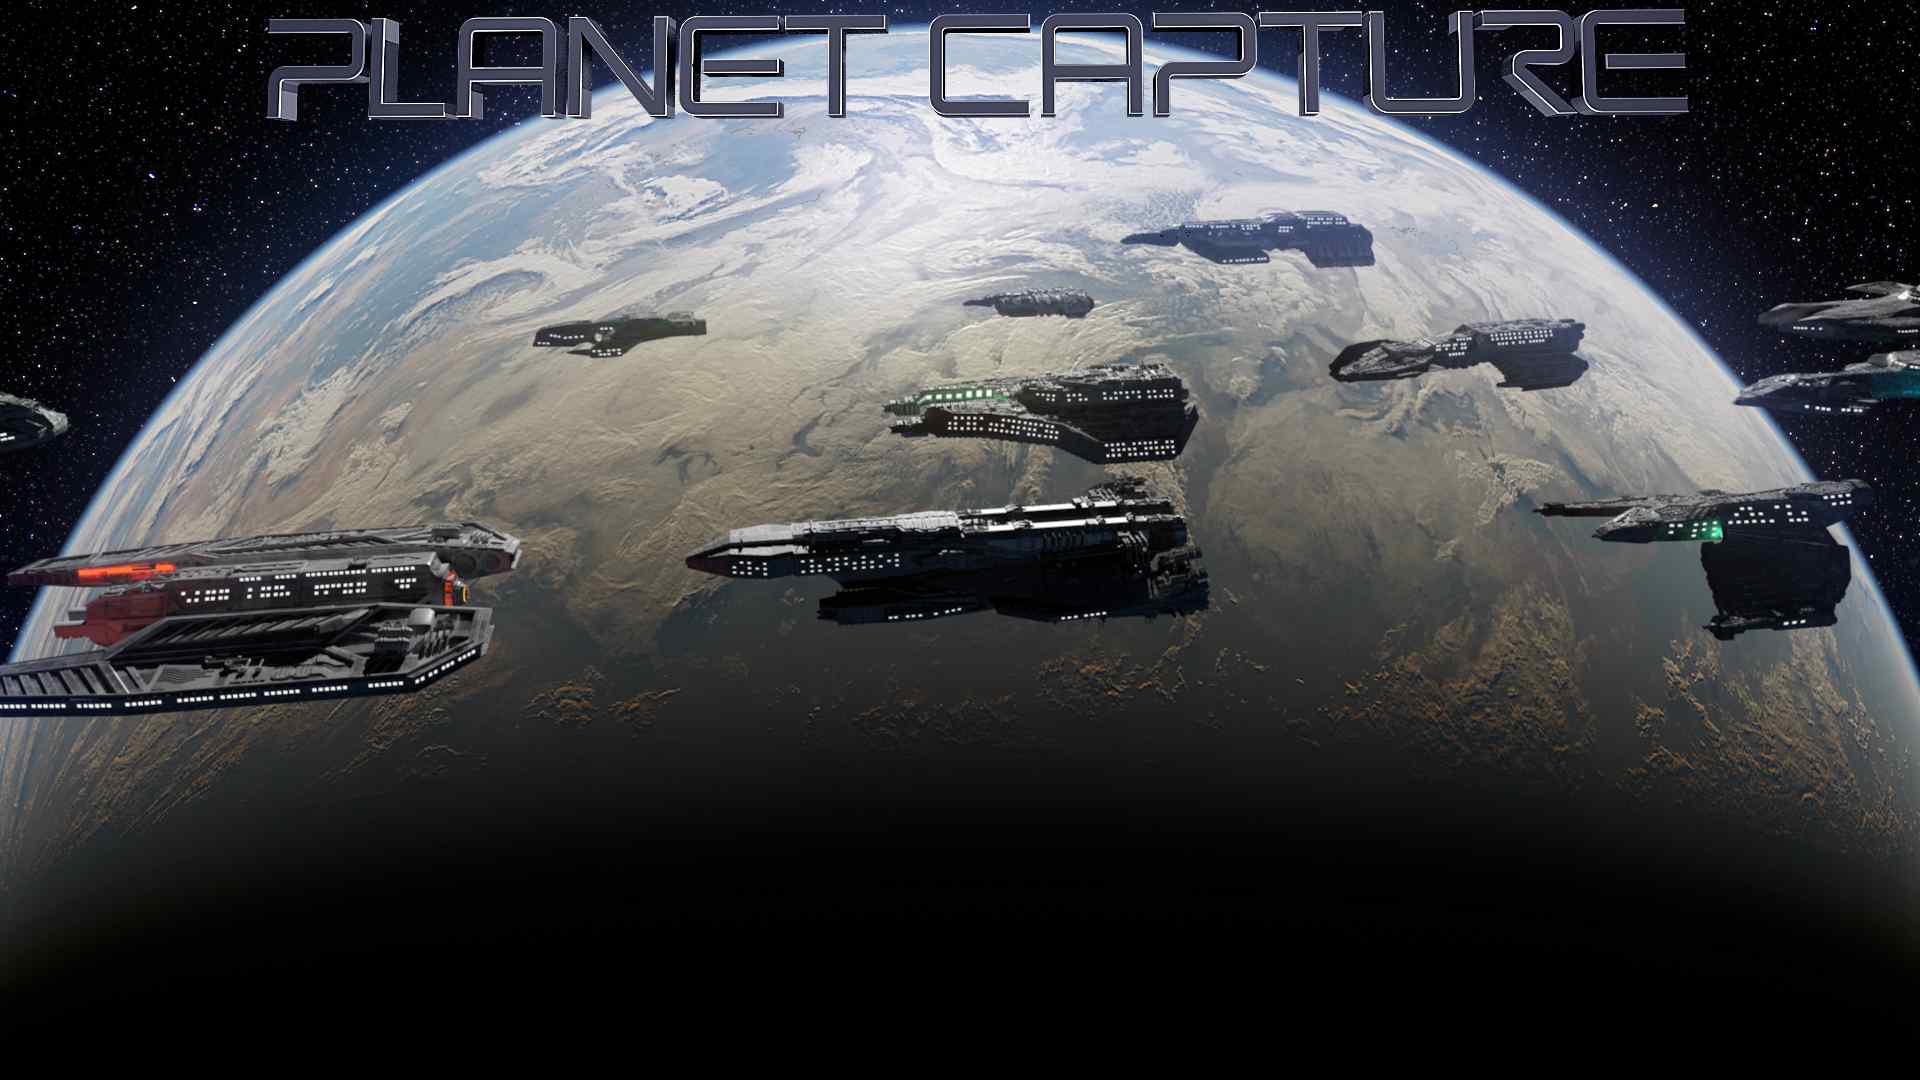 Planet Capture Space Planet Battleship Spaceship Ship DiTOGAMES Stars Video Games Video Game Art 1920x1080